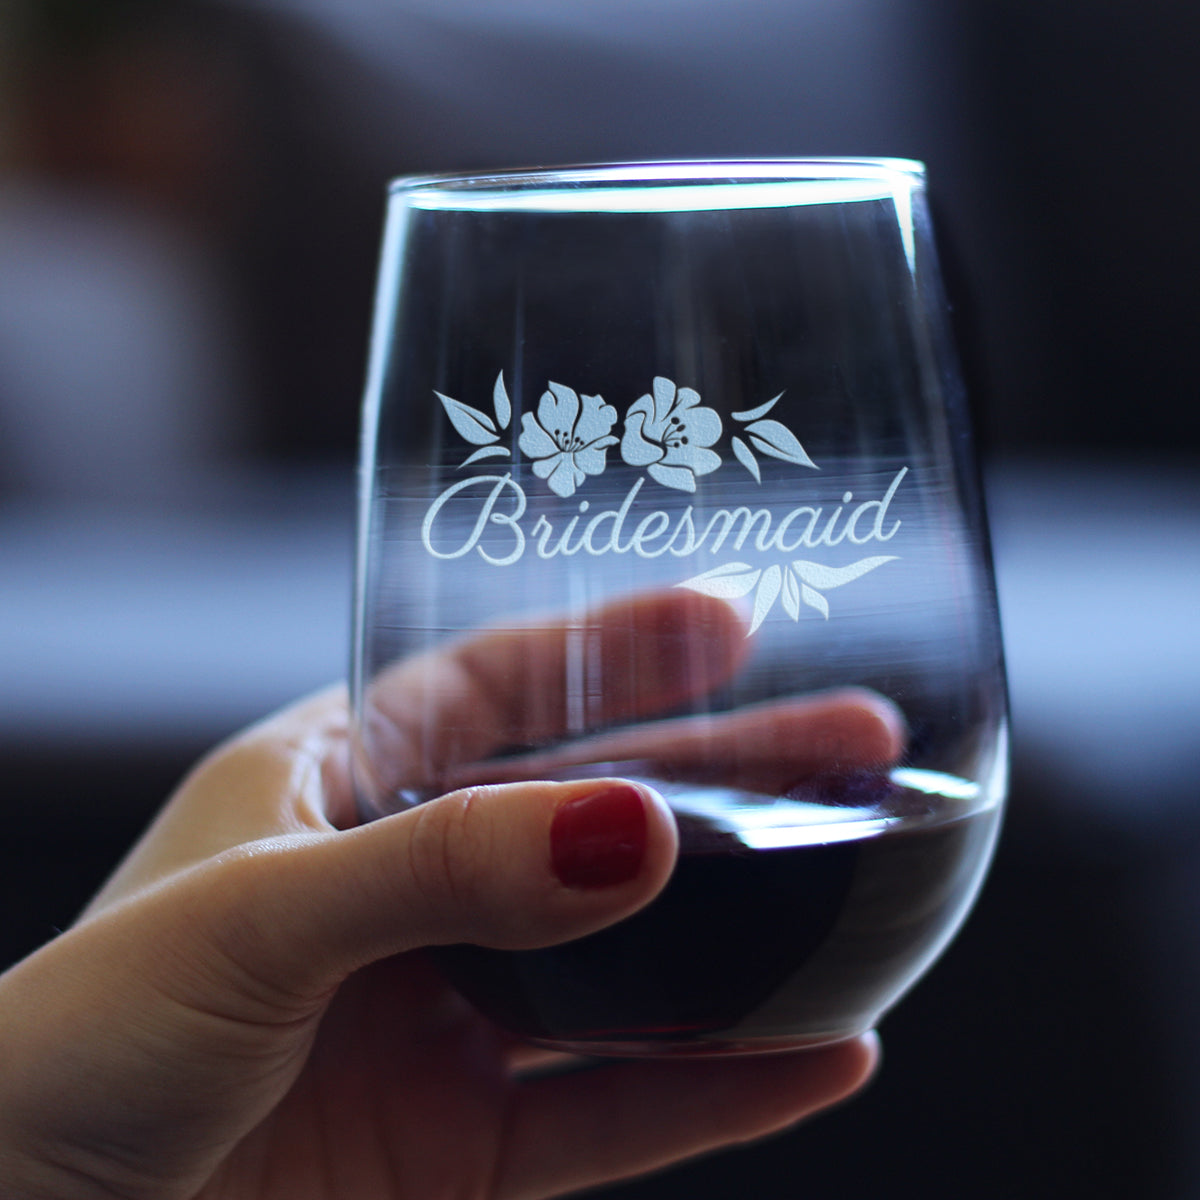 Bridesmaid Stemless Wine Glass - Bridesmaids Proposal Gifts - Unique Engraved Wedding Cup Gift